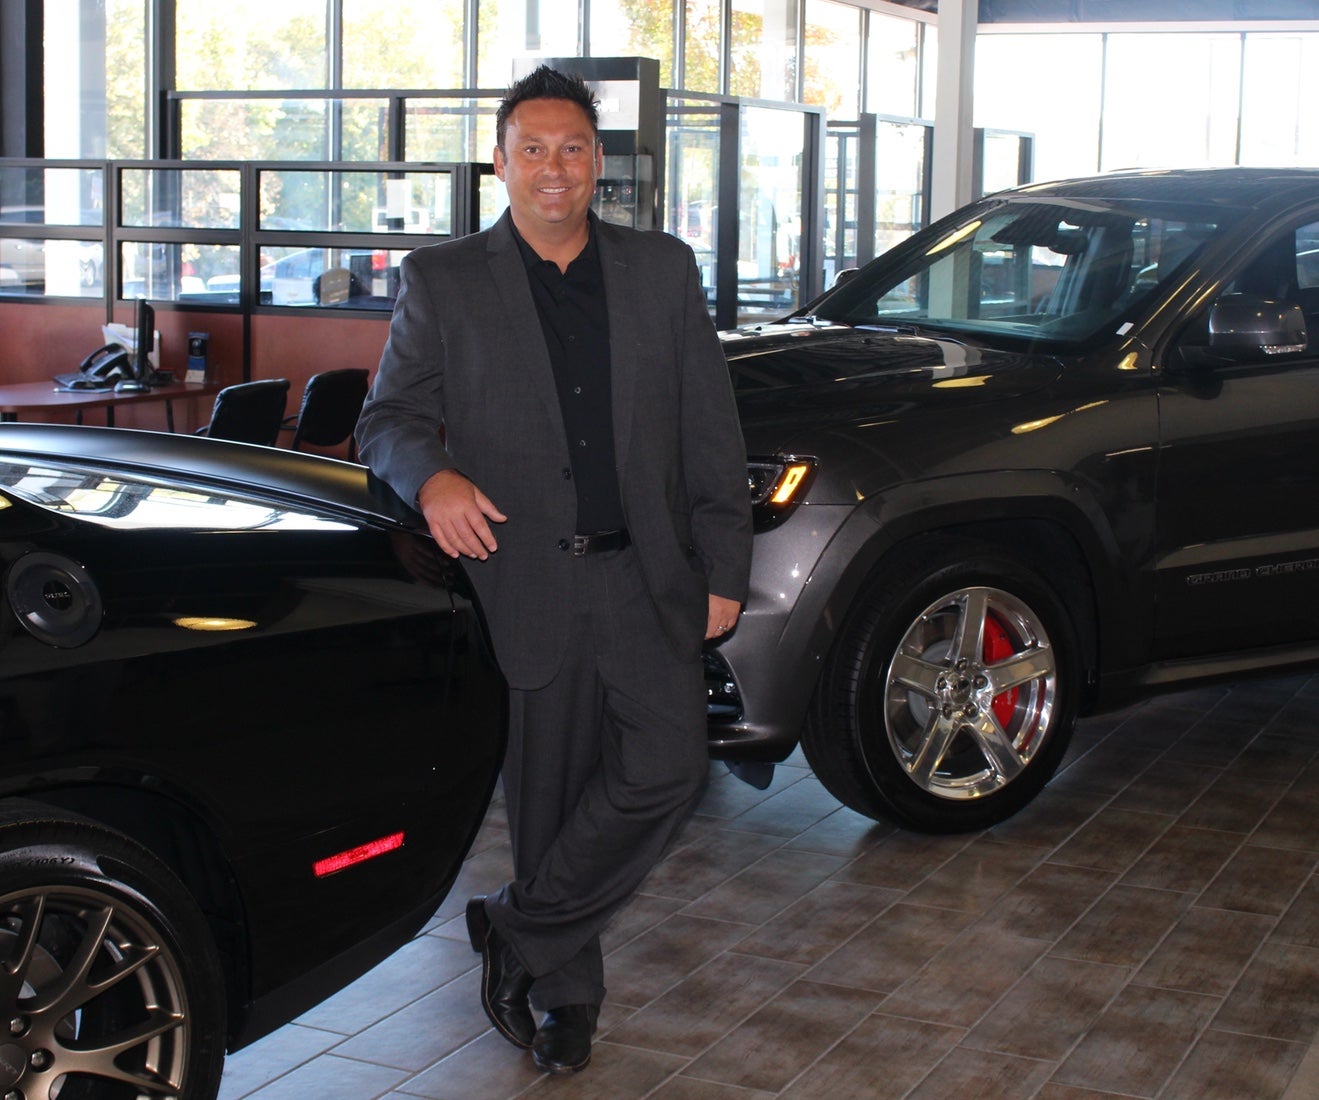 After five years in the community, Joe Maus has sold his two Albemarle dealerships – The Stanly News & Press